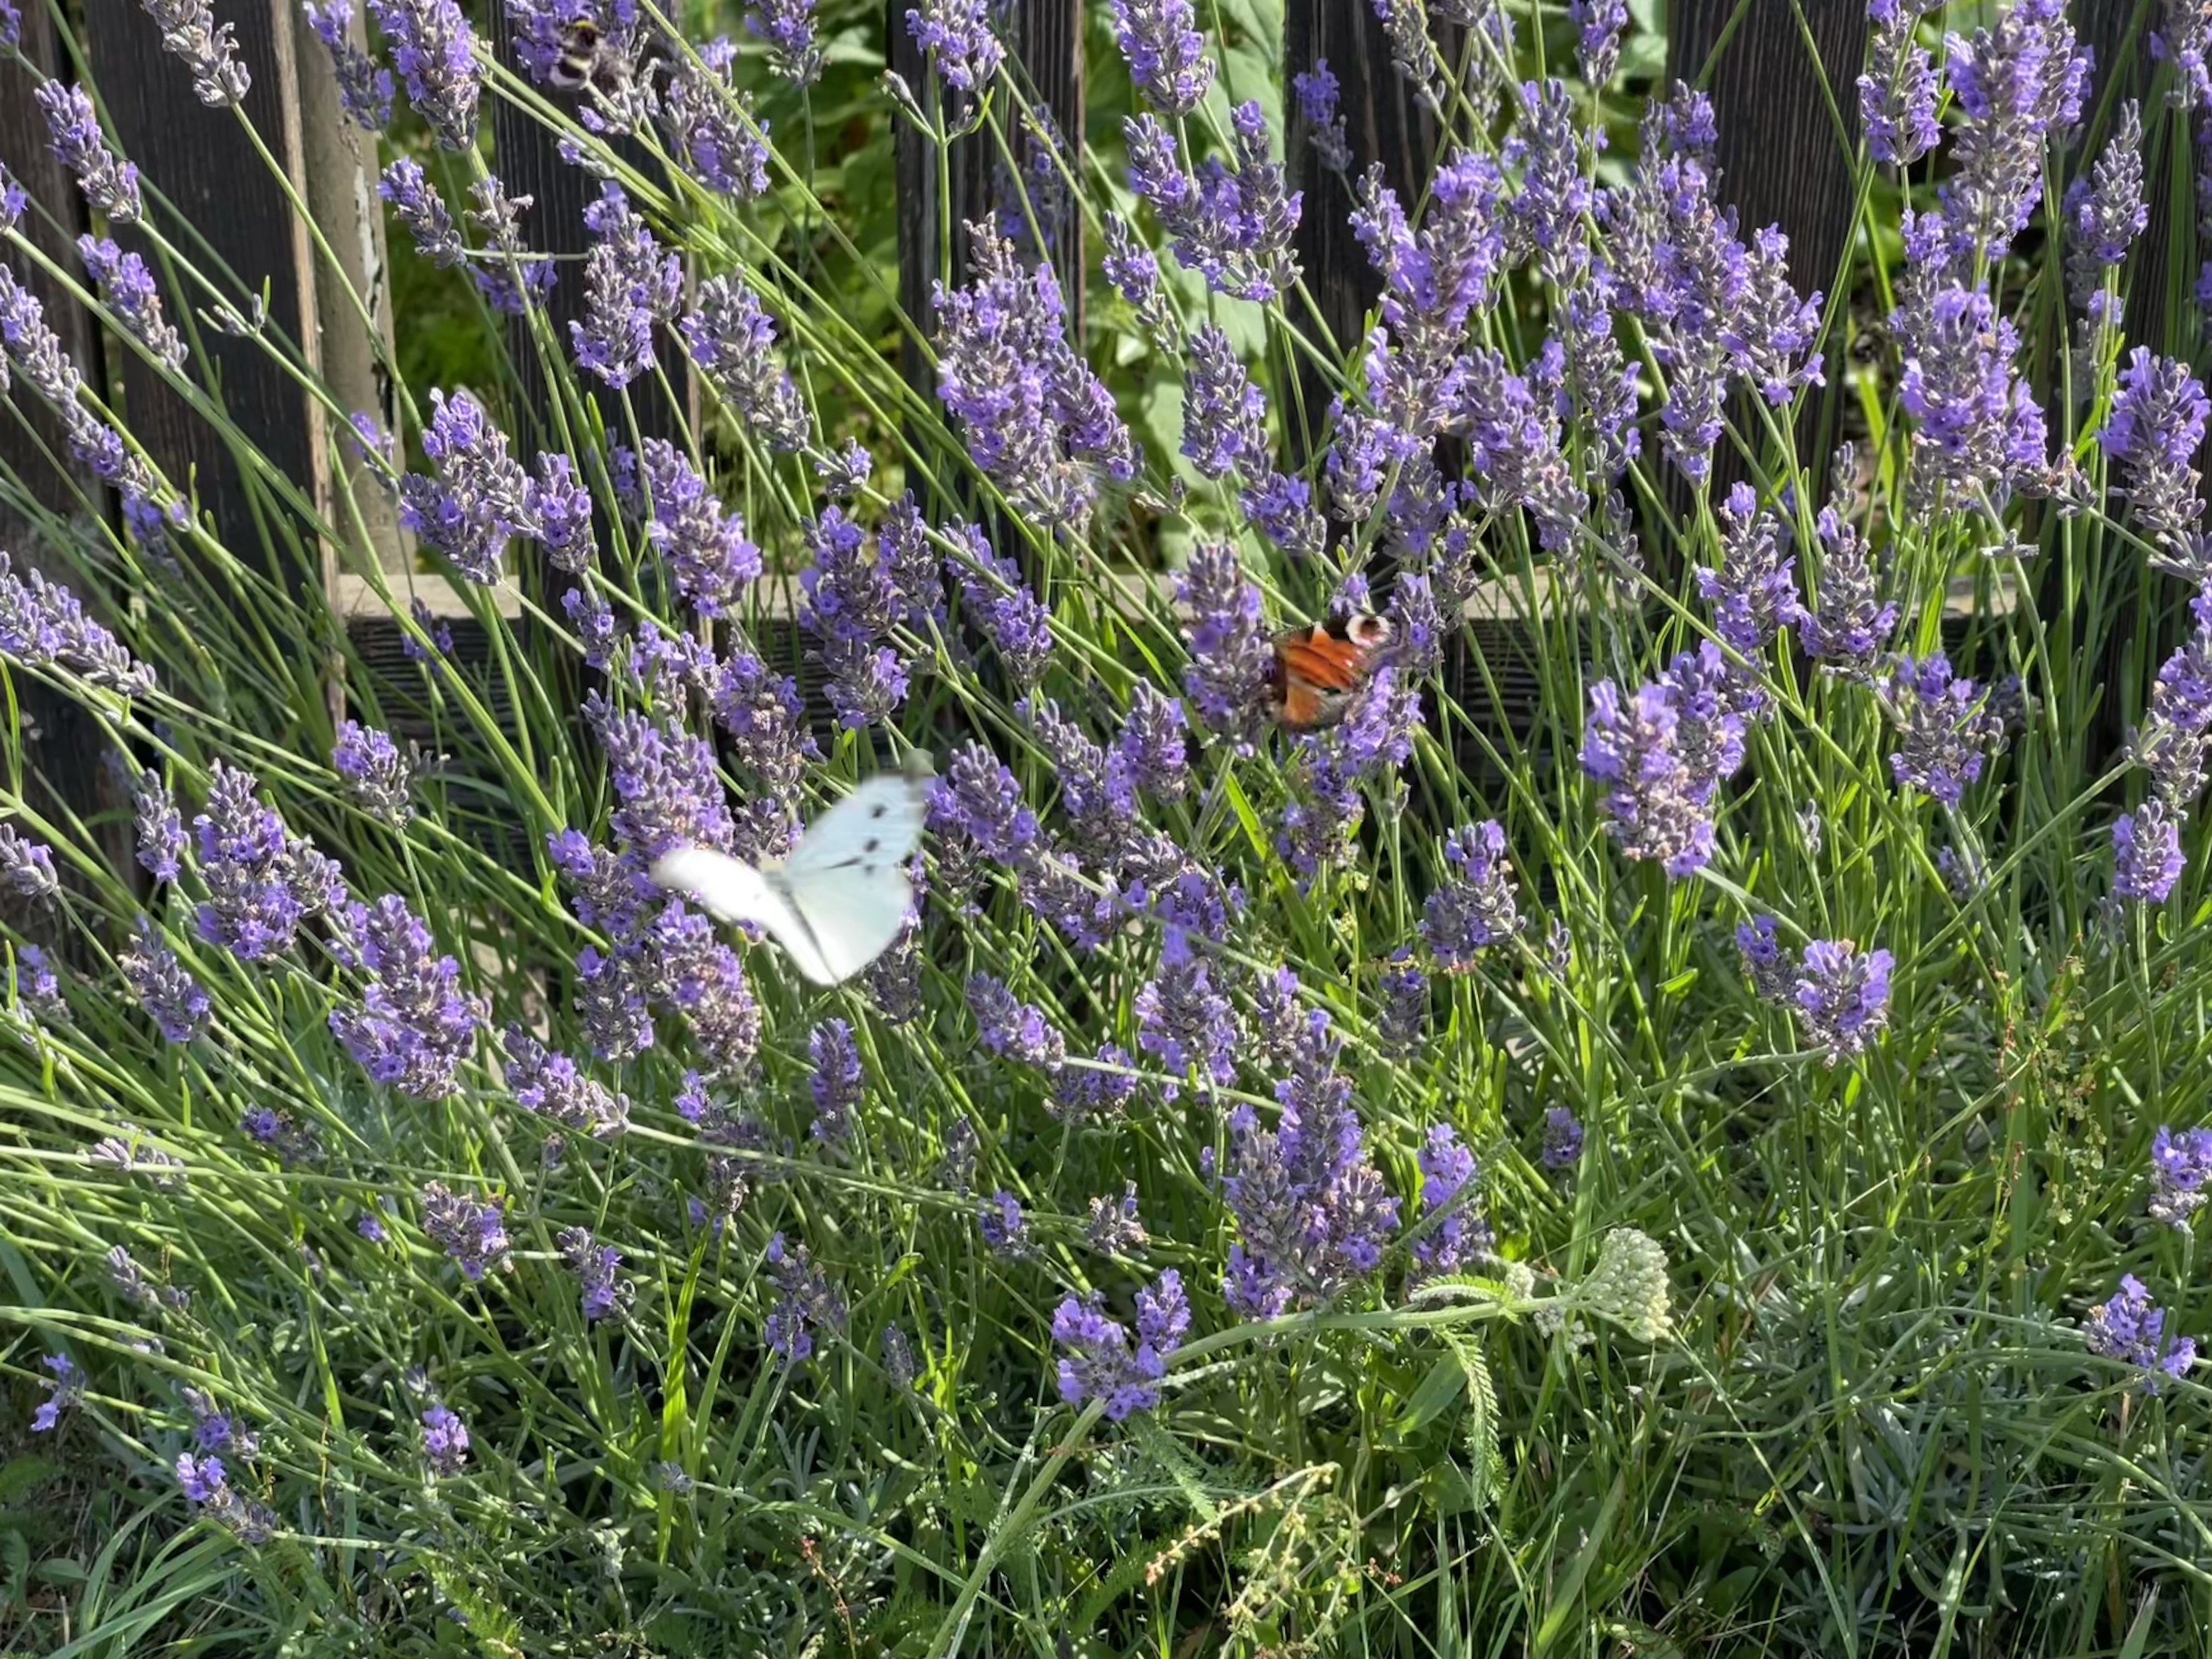 A garden scene with blooming lavender flowers and two butterflies, one white and one orange, among the foliage. A wooden fence is visible in the background.